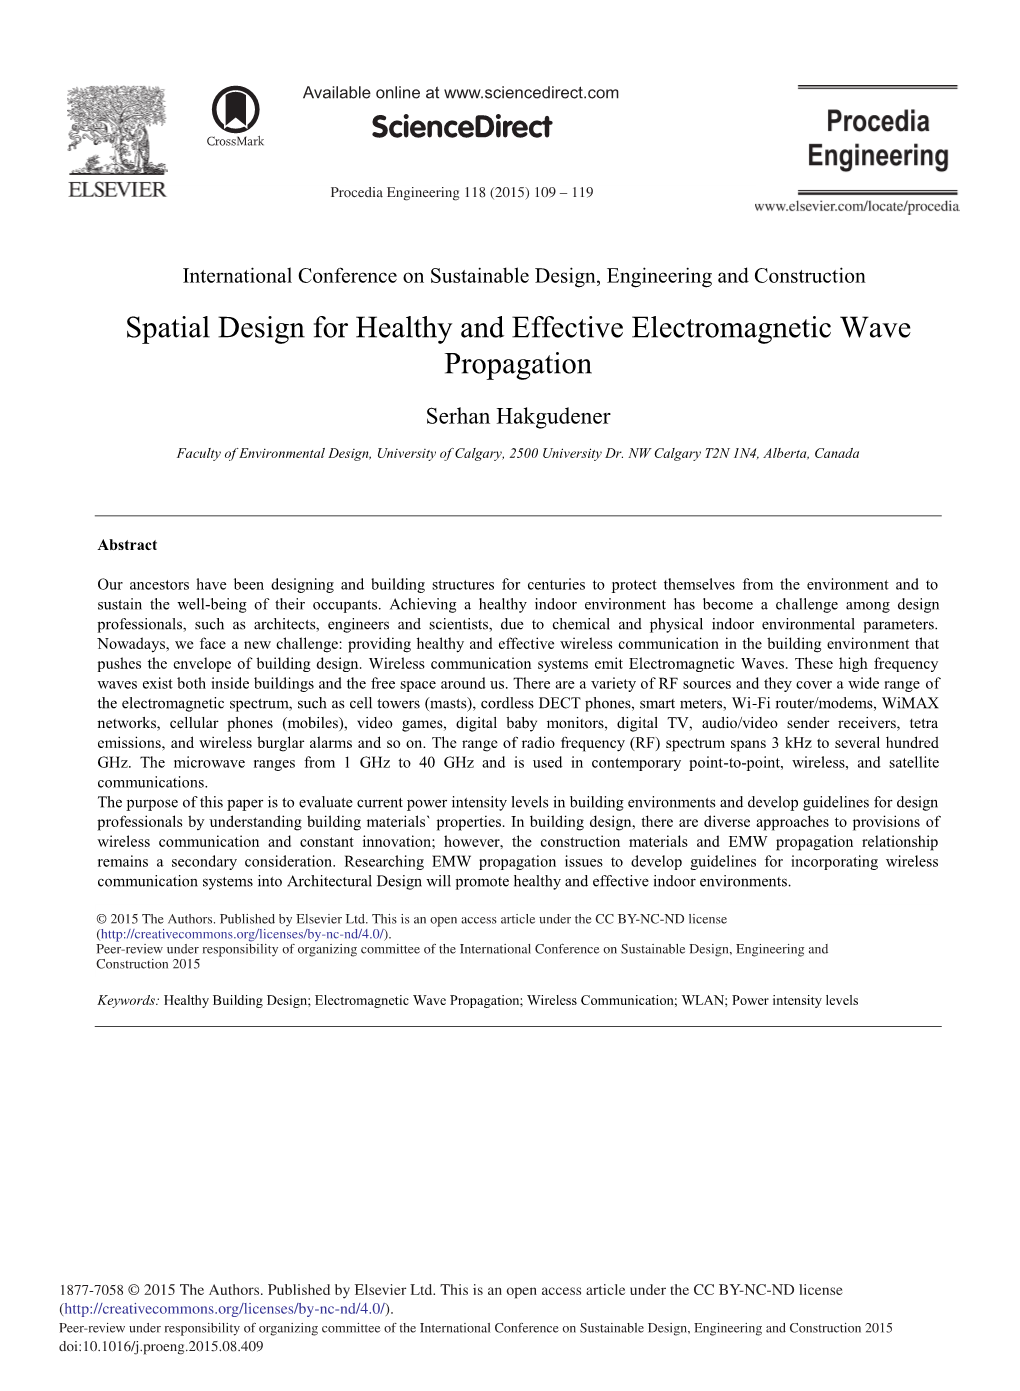 Spatial Design for Healthy and Effective Electromagnetic Wave Propagation